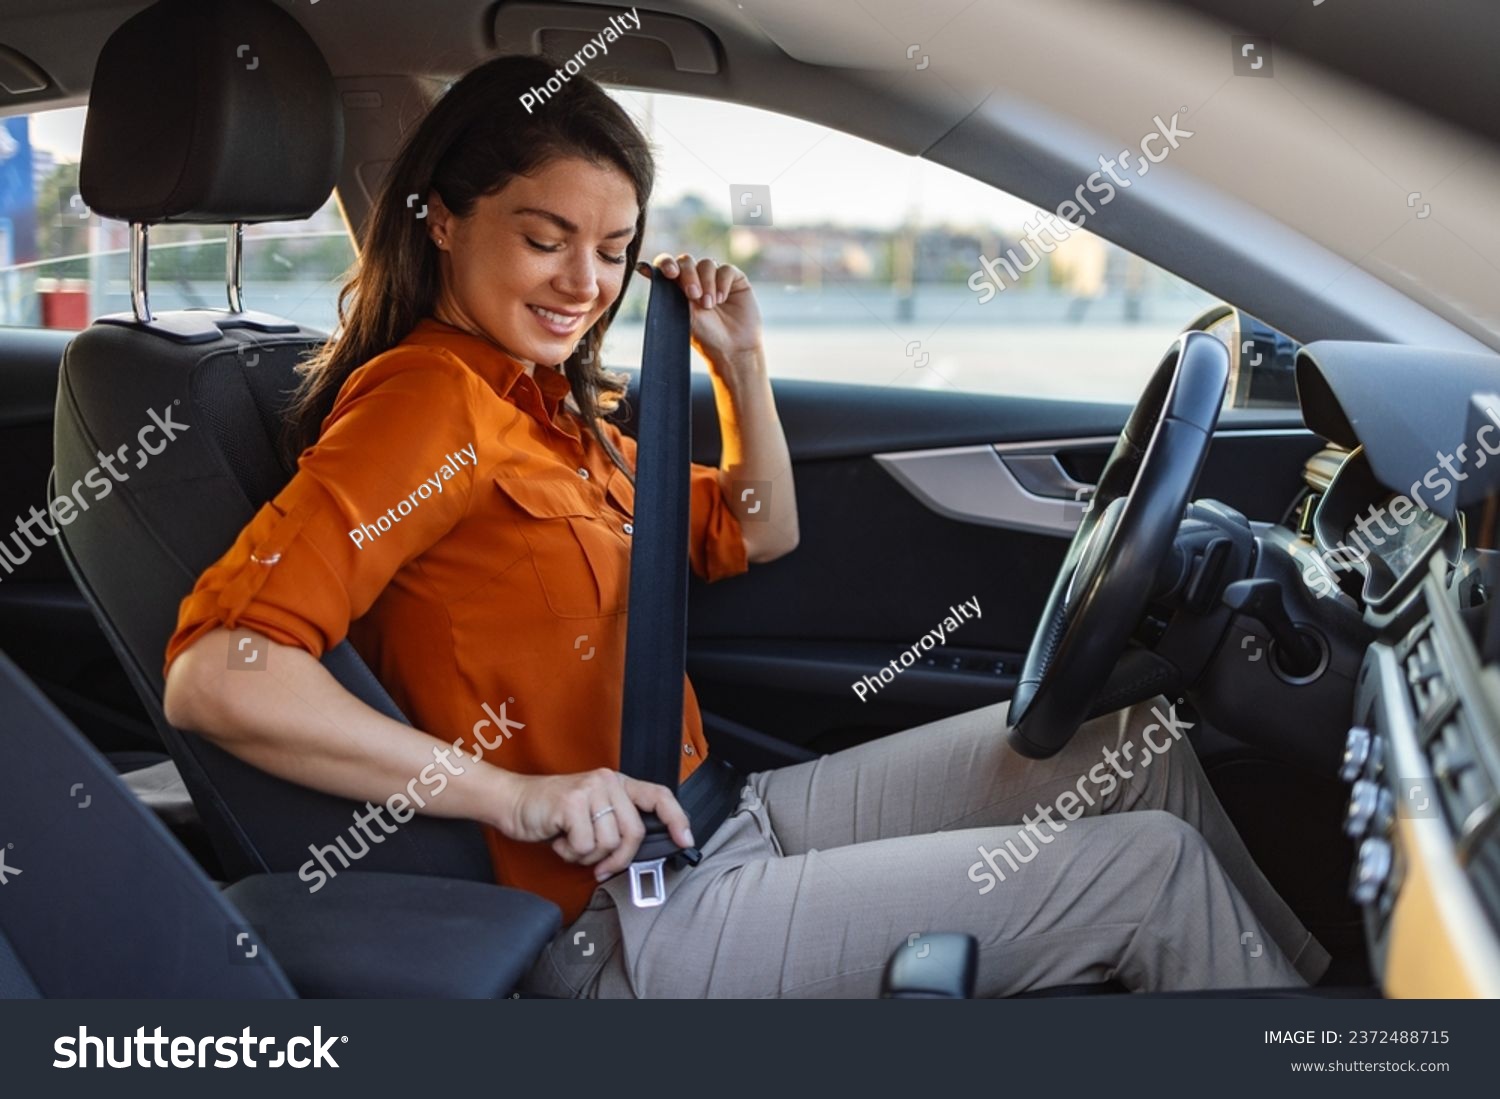 Young woman sitting on car seat and fastening seat belt, car safety concept. Woman fastens a seat belt in the car. Caucasian woman driver fastening car seat belt while sitting behind the wheel. #2372488715